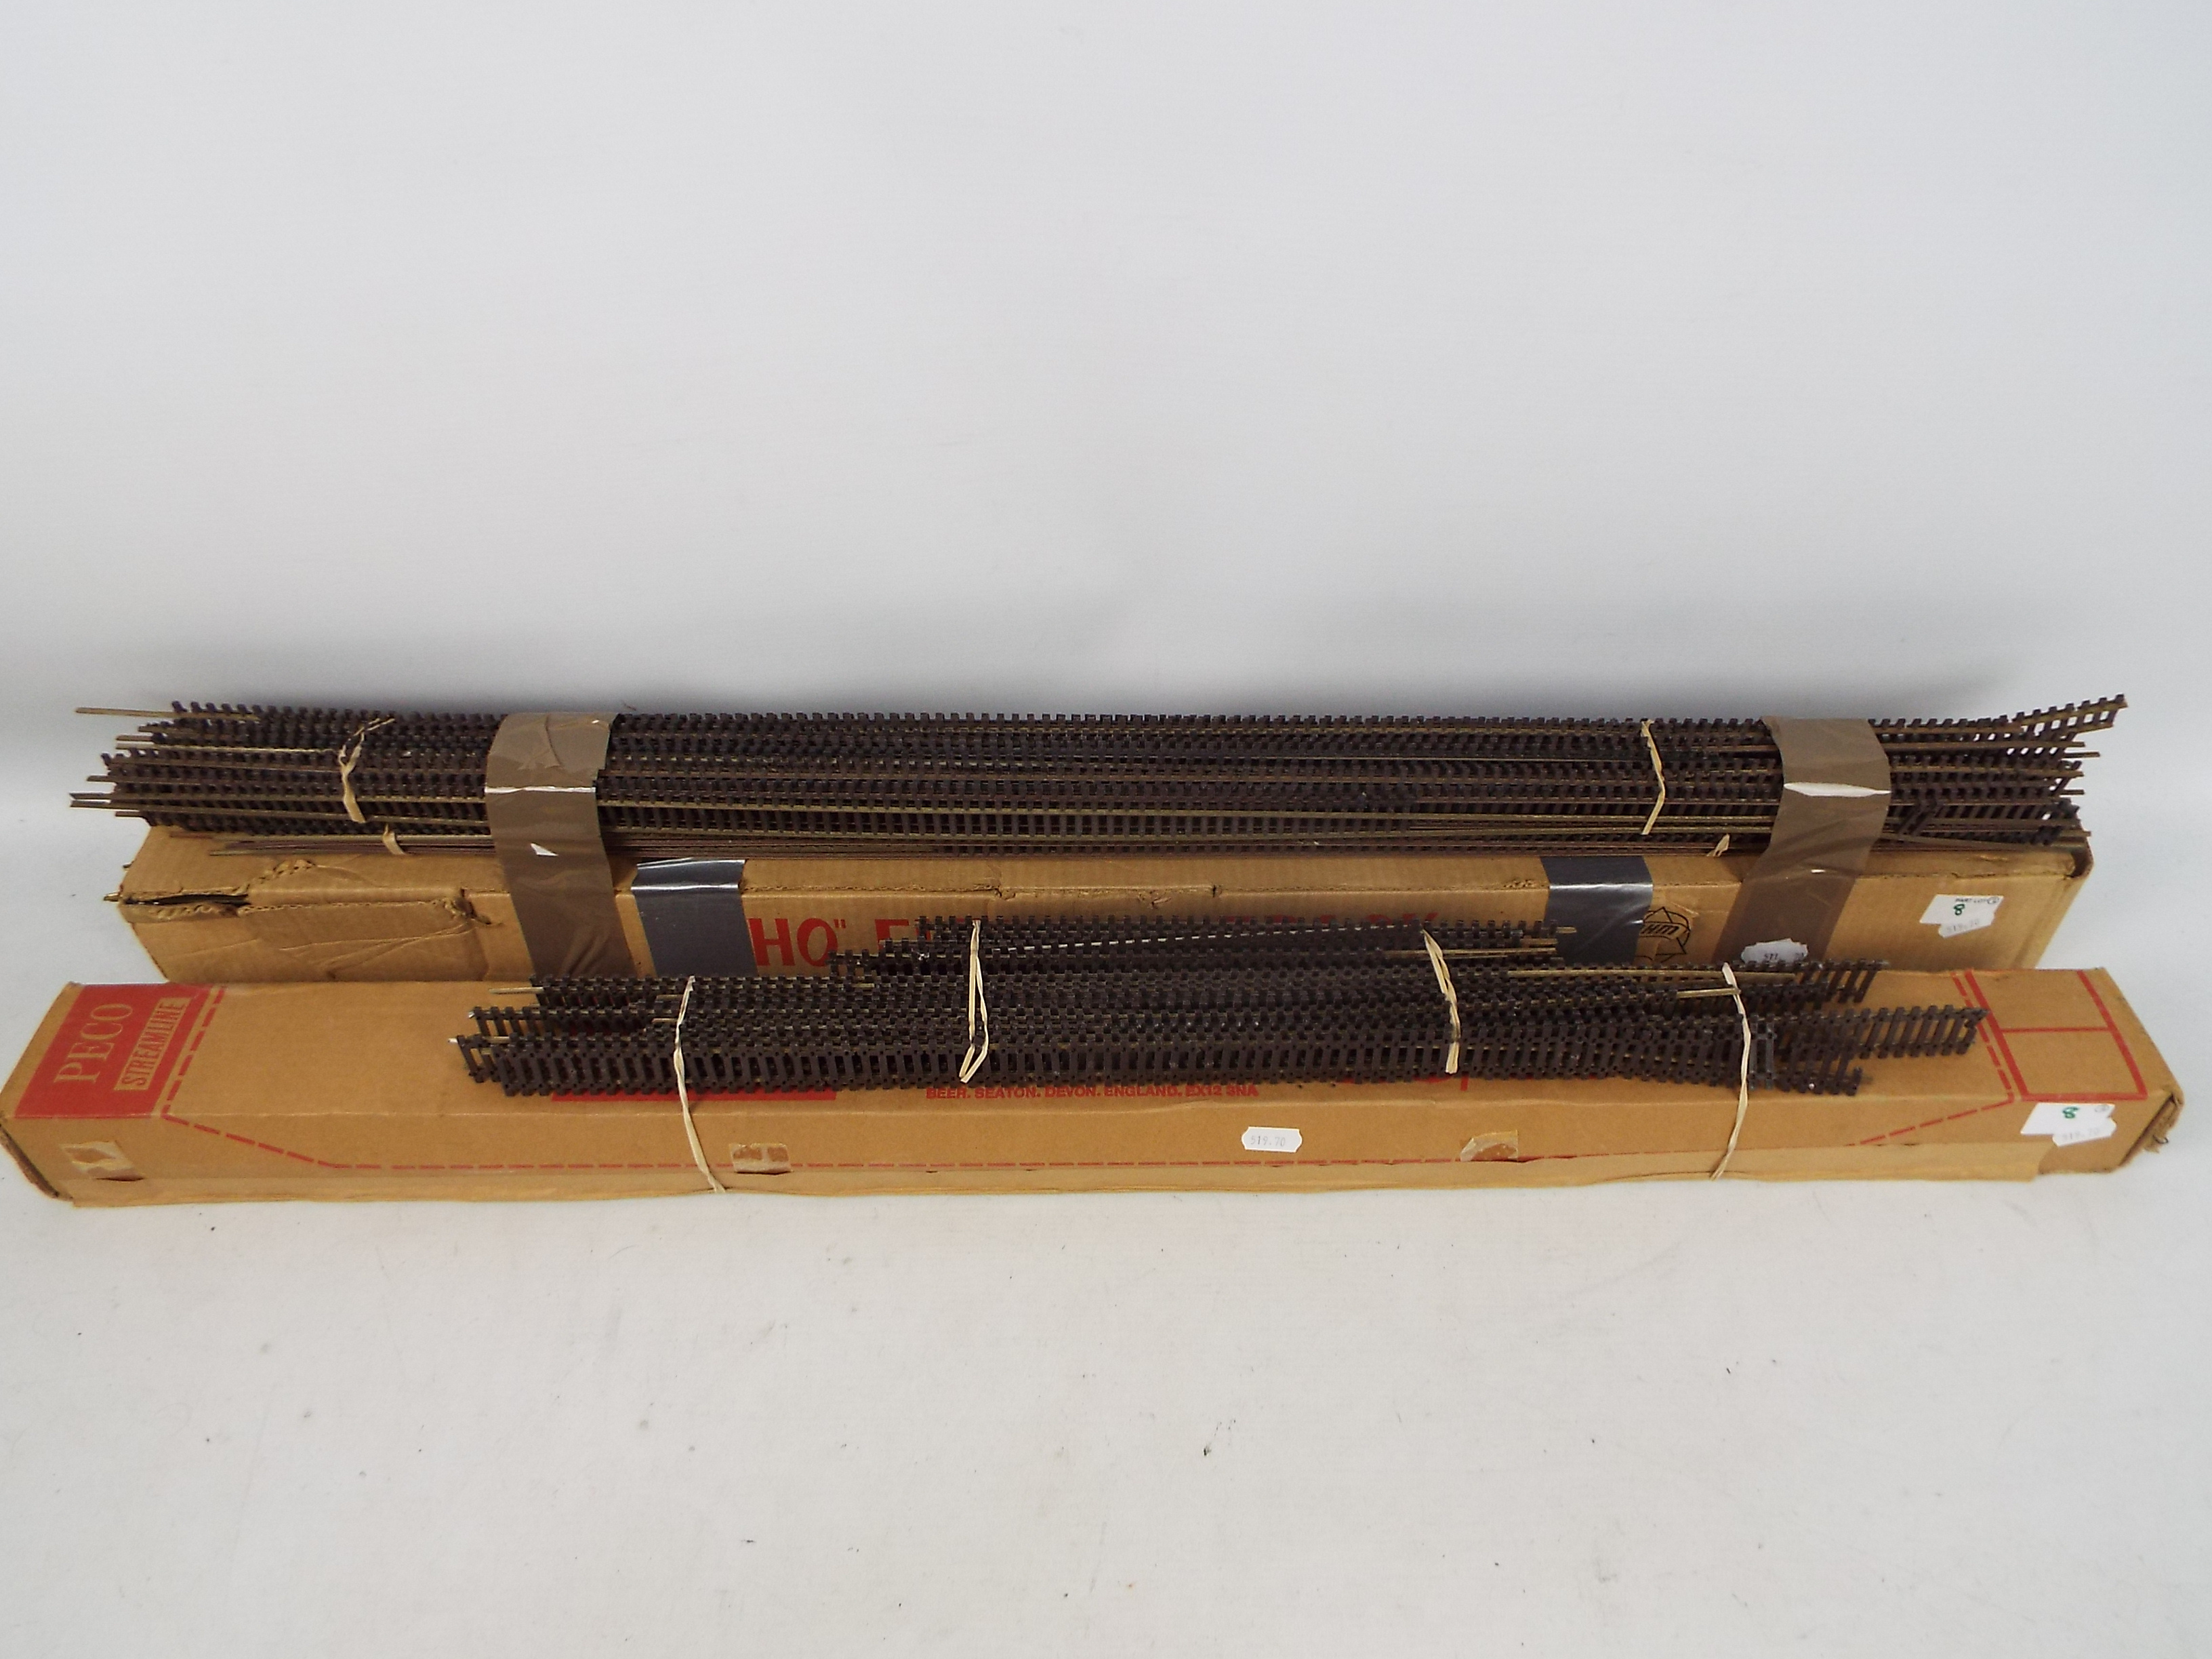 A collection of HO - OO Gauge track incl